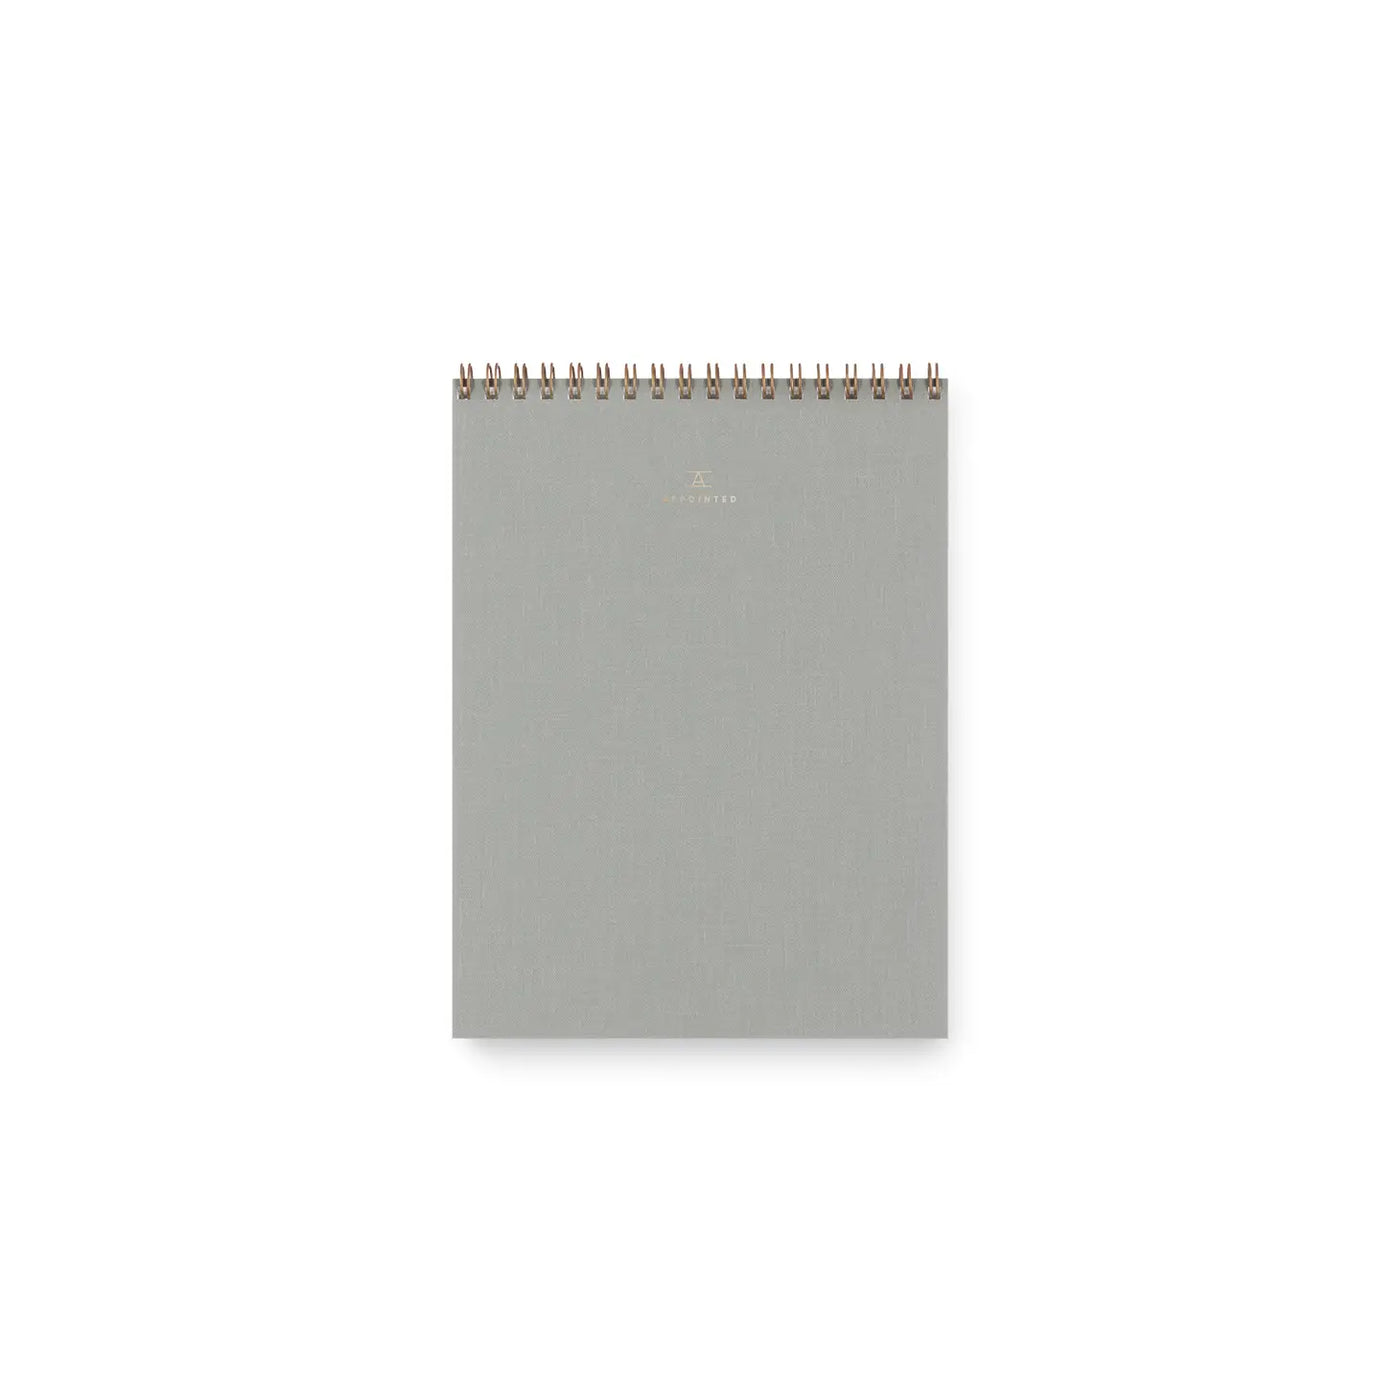 Appointed Top Spiral Office Notepad - Dove Gray